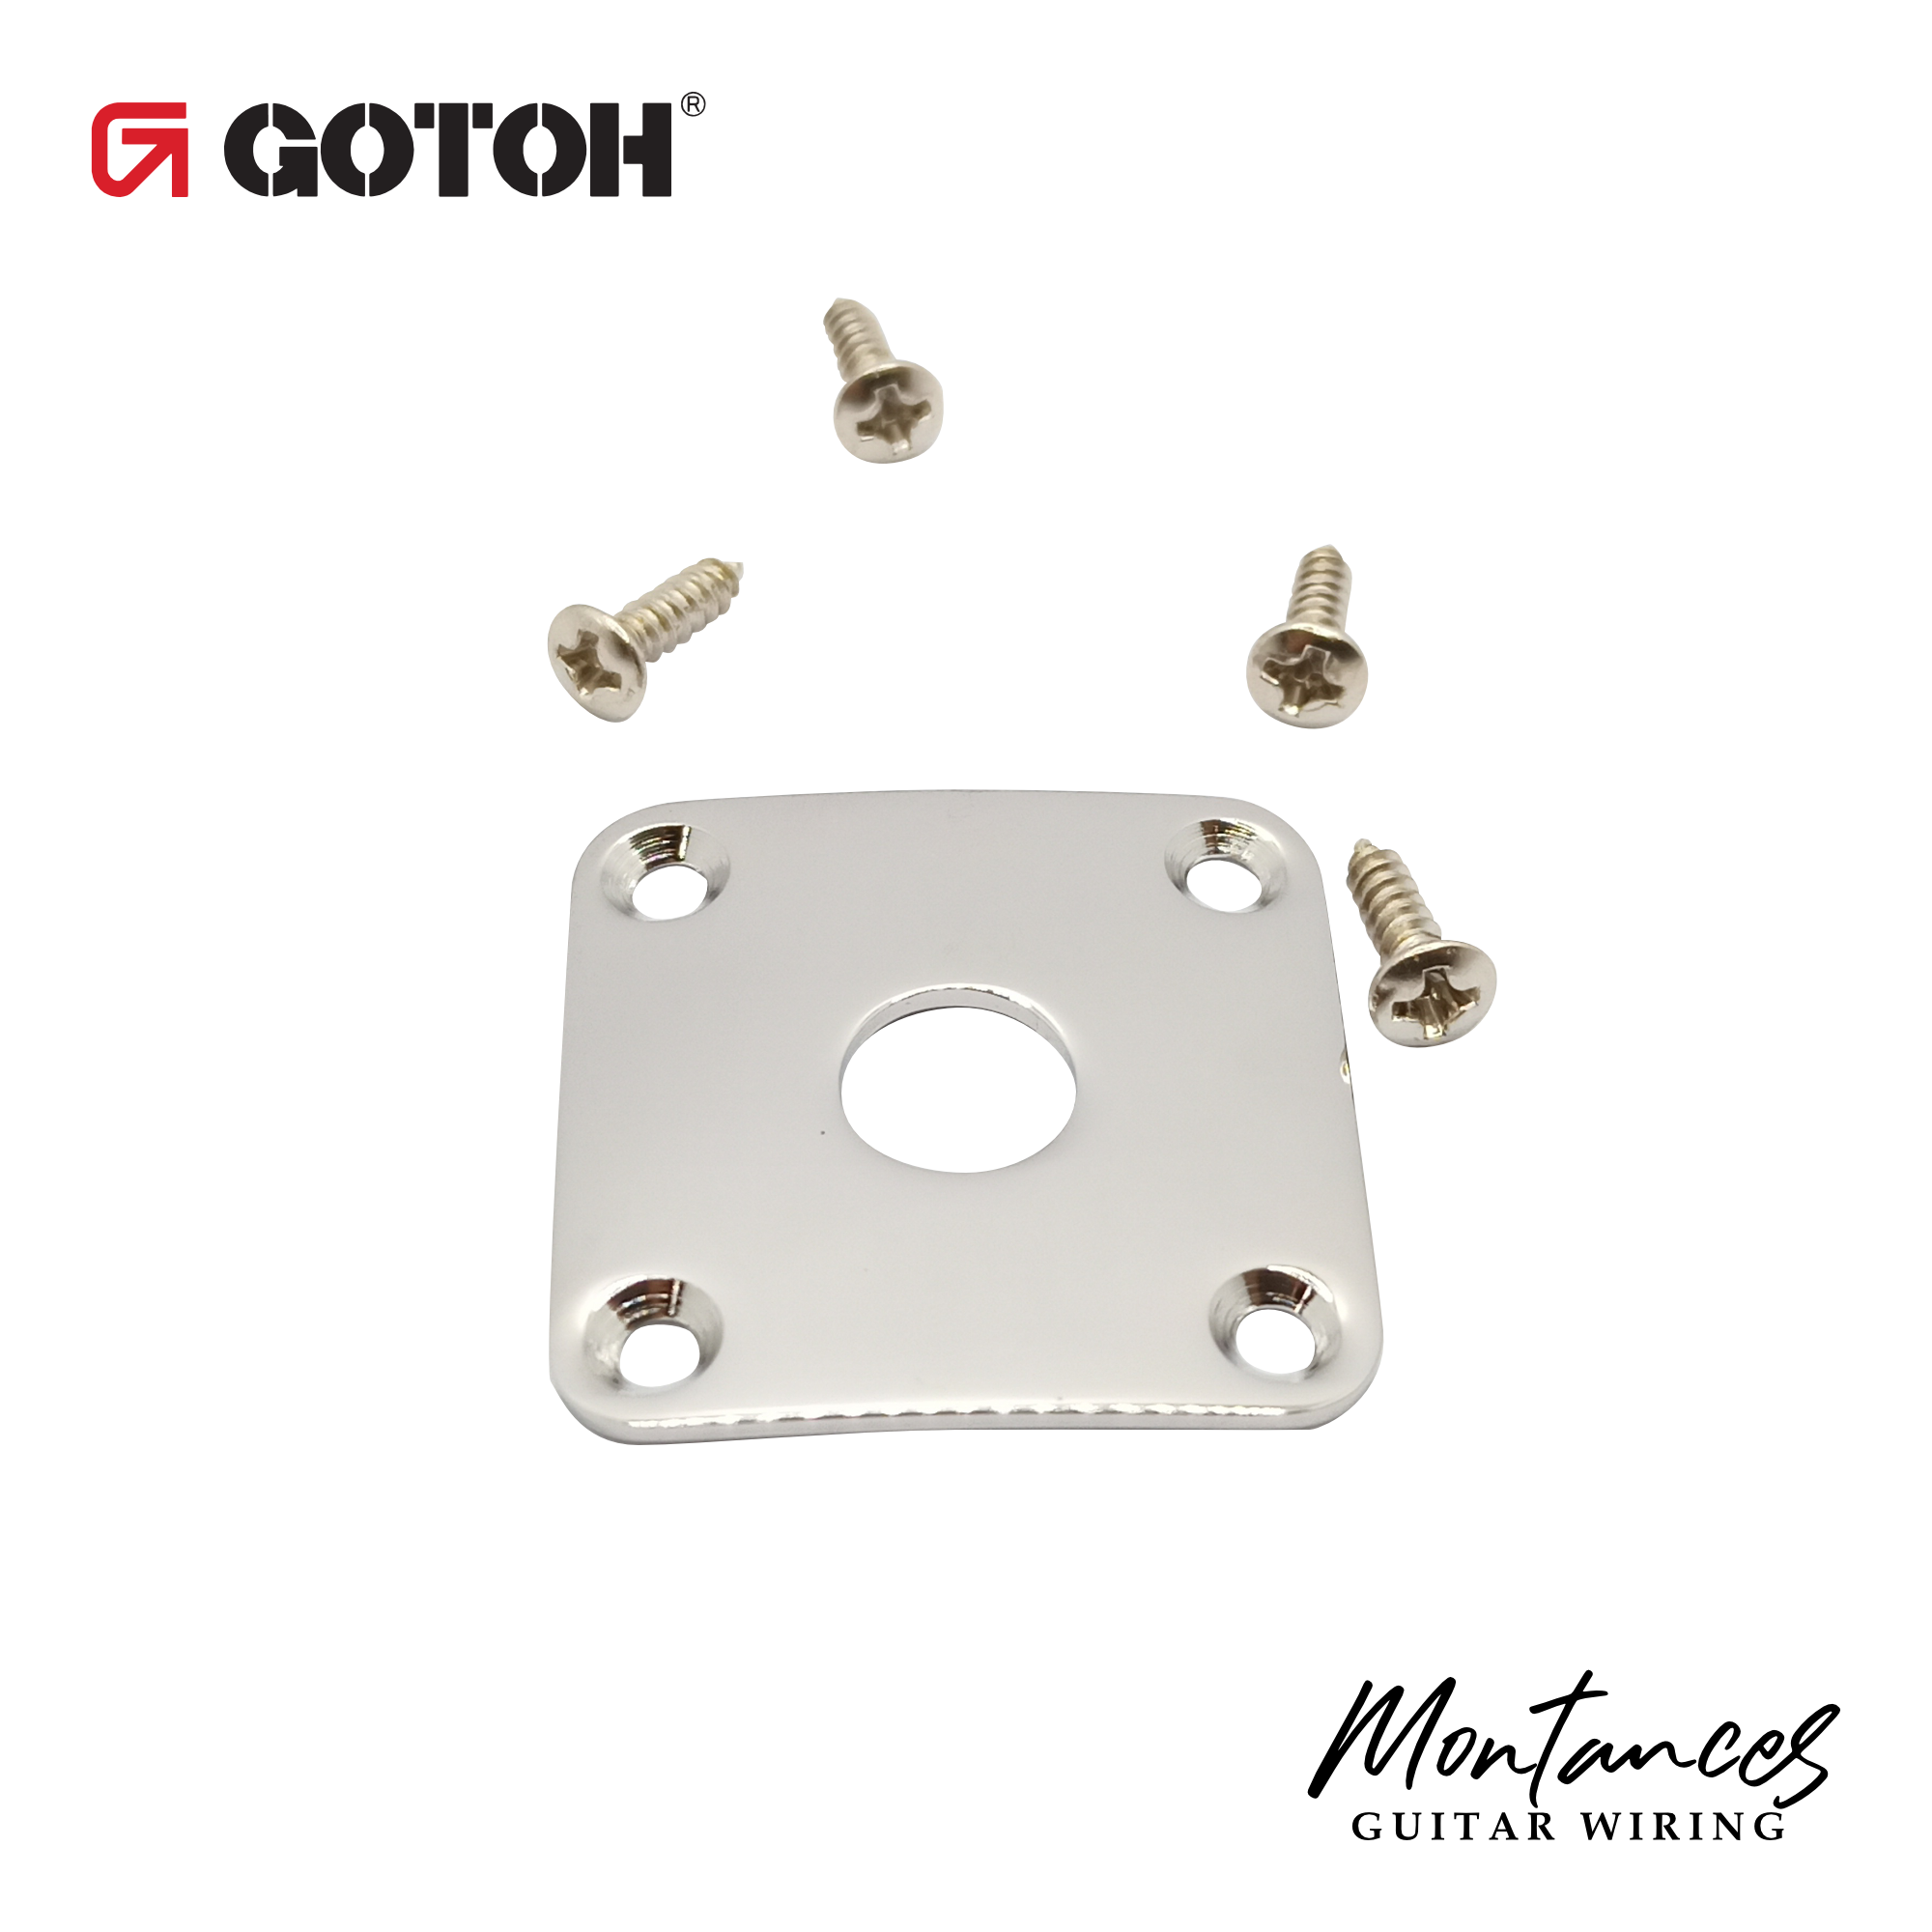 Gotoh® Jack Plate for guitar and bass, Stainless steel